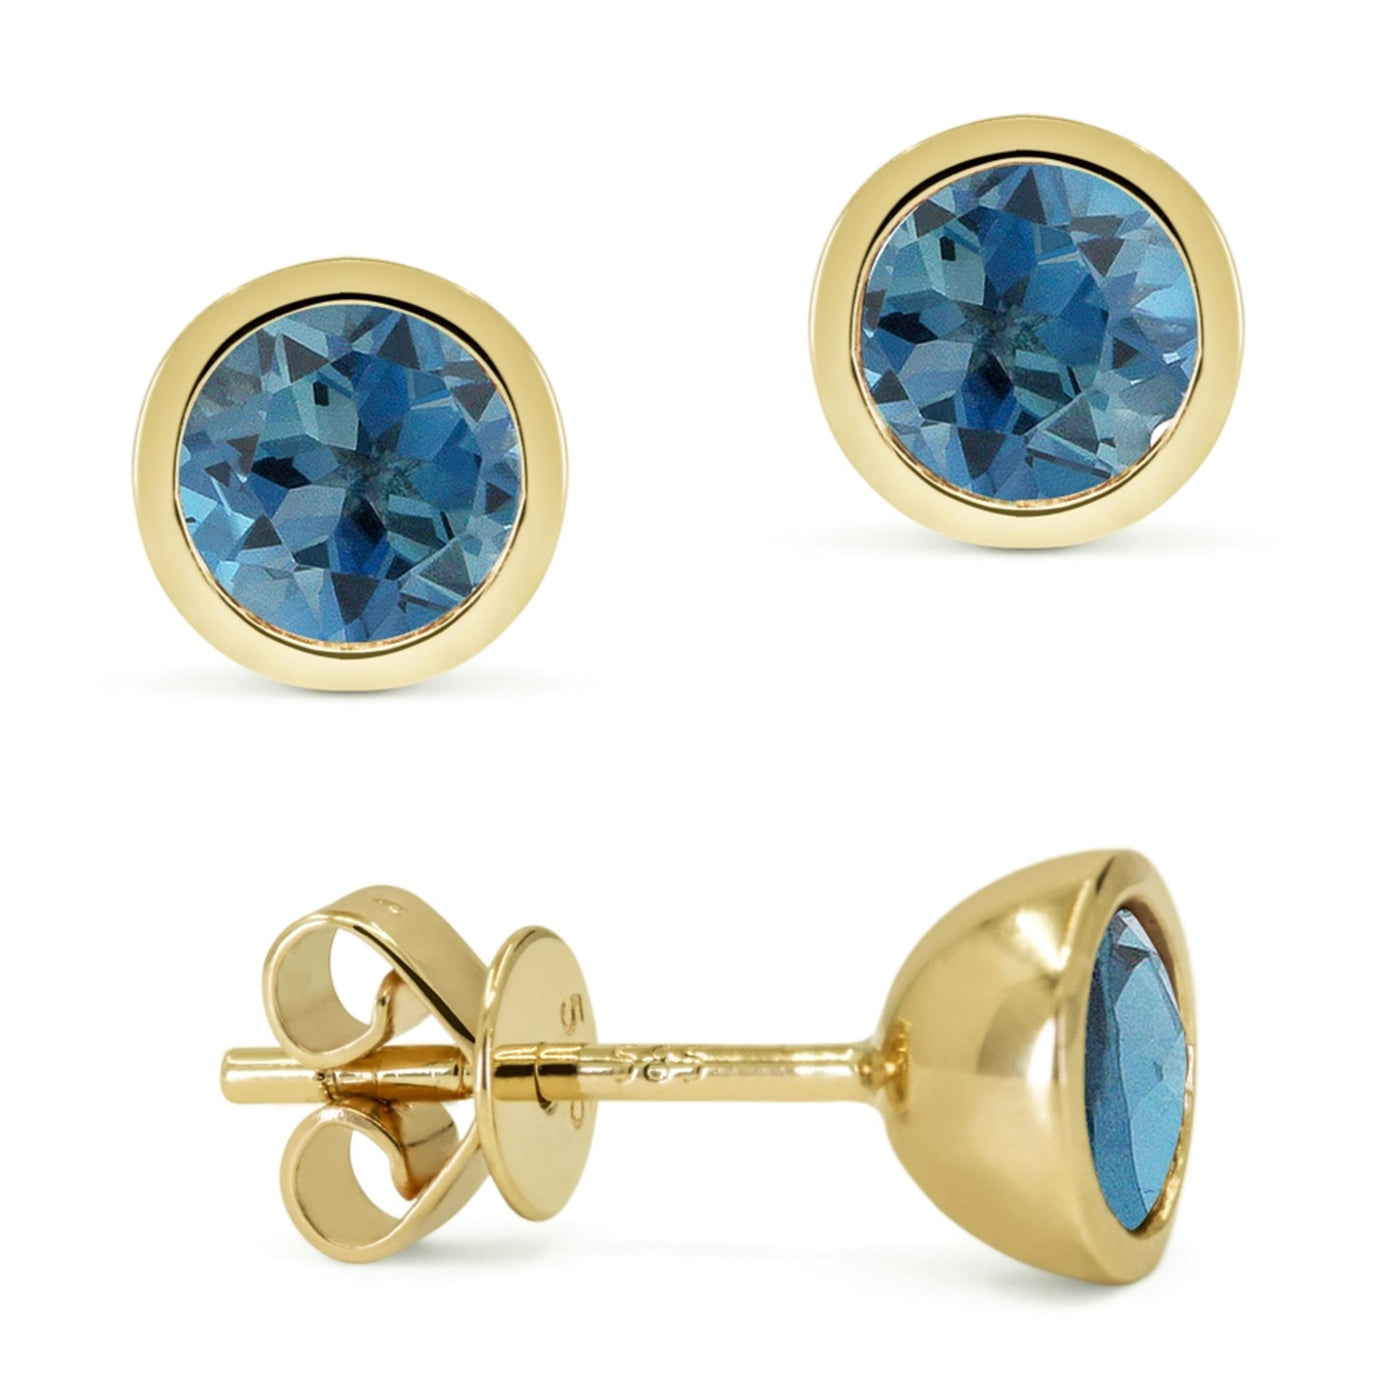 Madison L 14K Yellow Gold 1.12ctw Solitaire Bezel Style Round Blue Topaz Earrings